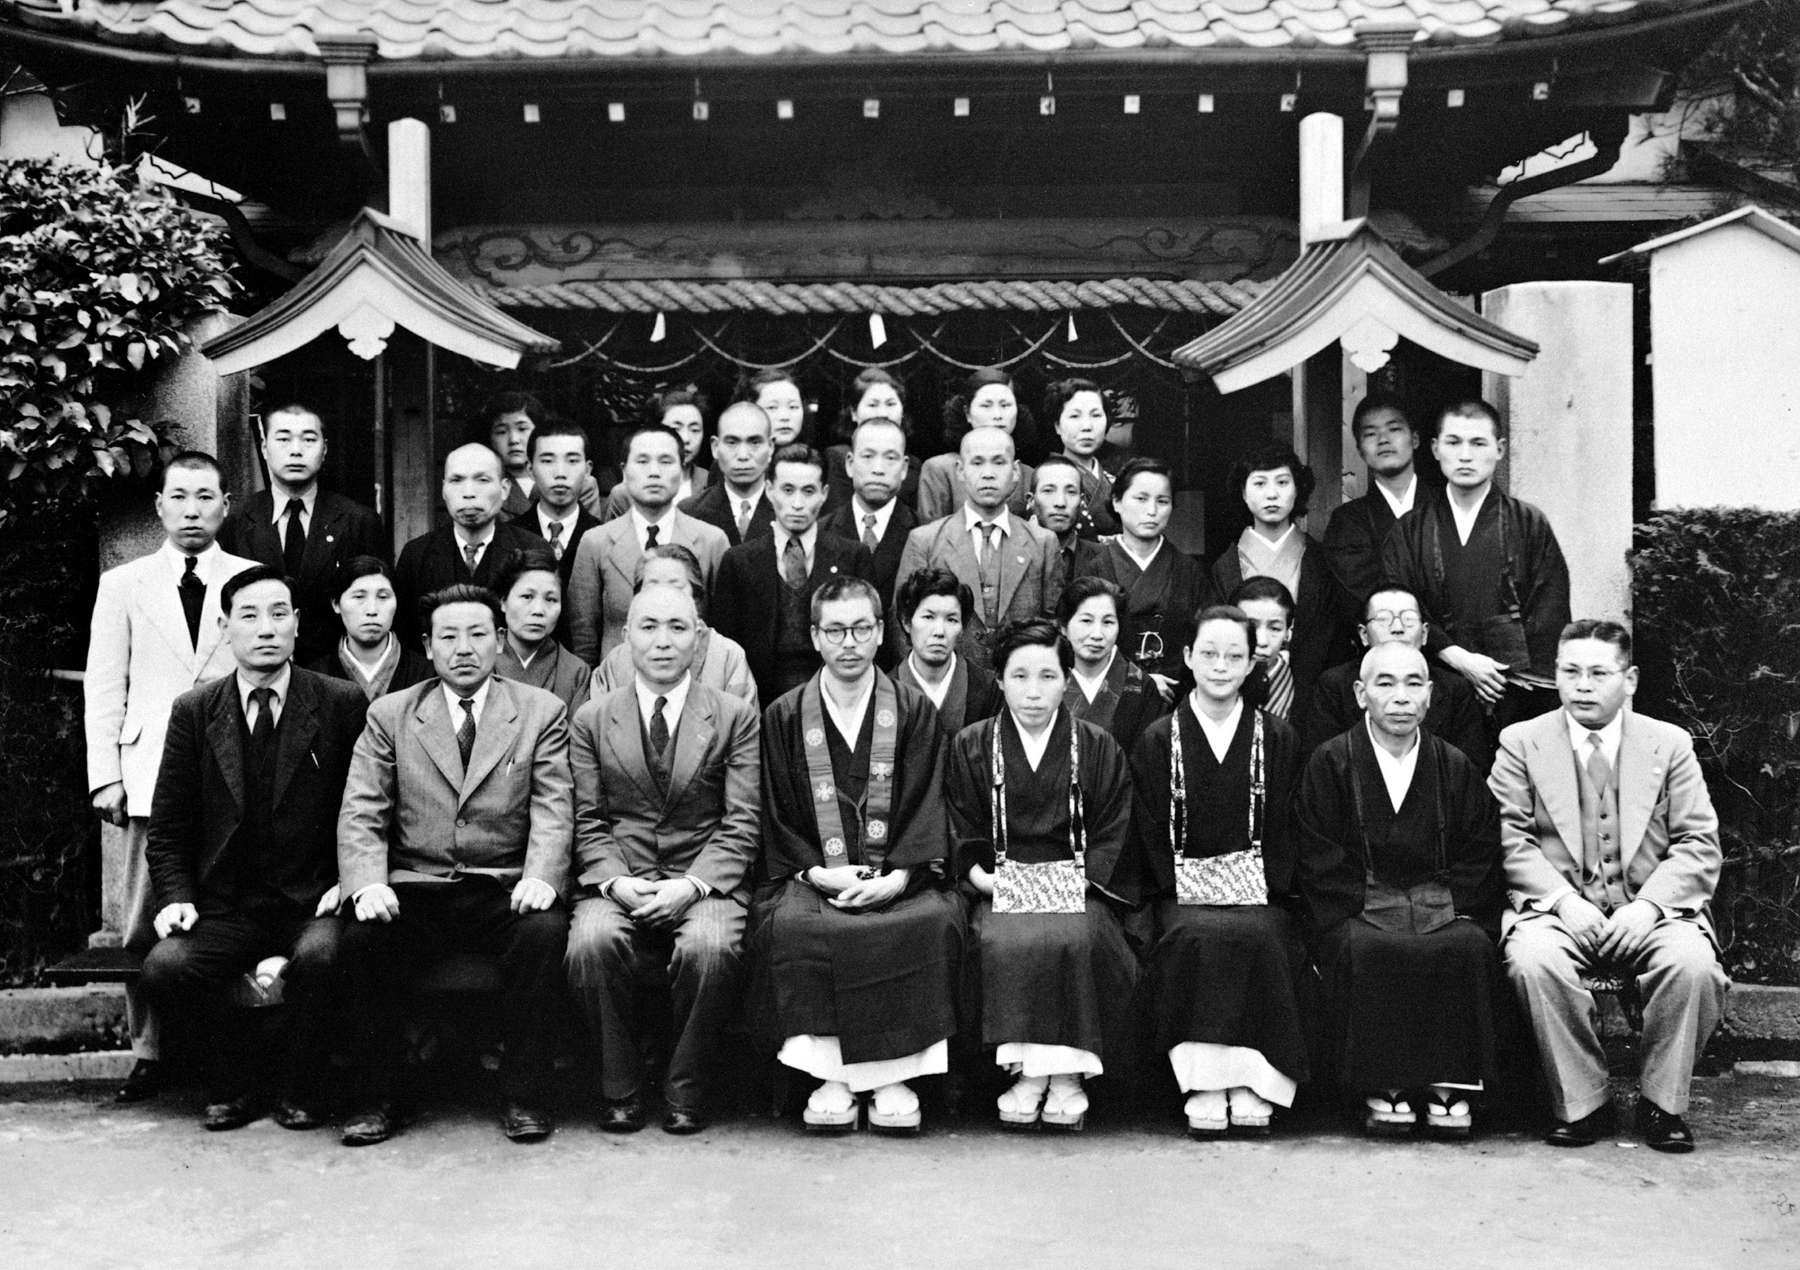 Shinjo and Tomoji, seated center, wearing priestly robes, pose for a portrait with a large, formally dressed group in front of the gate to Shinchoji temple.